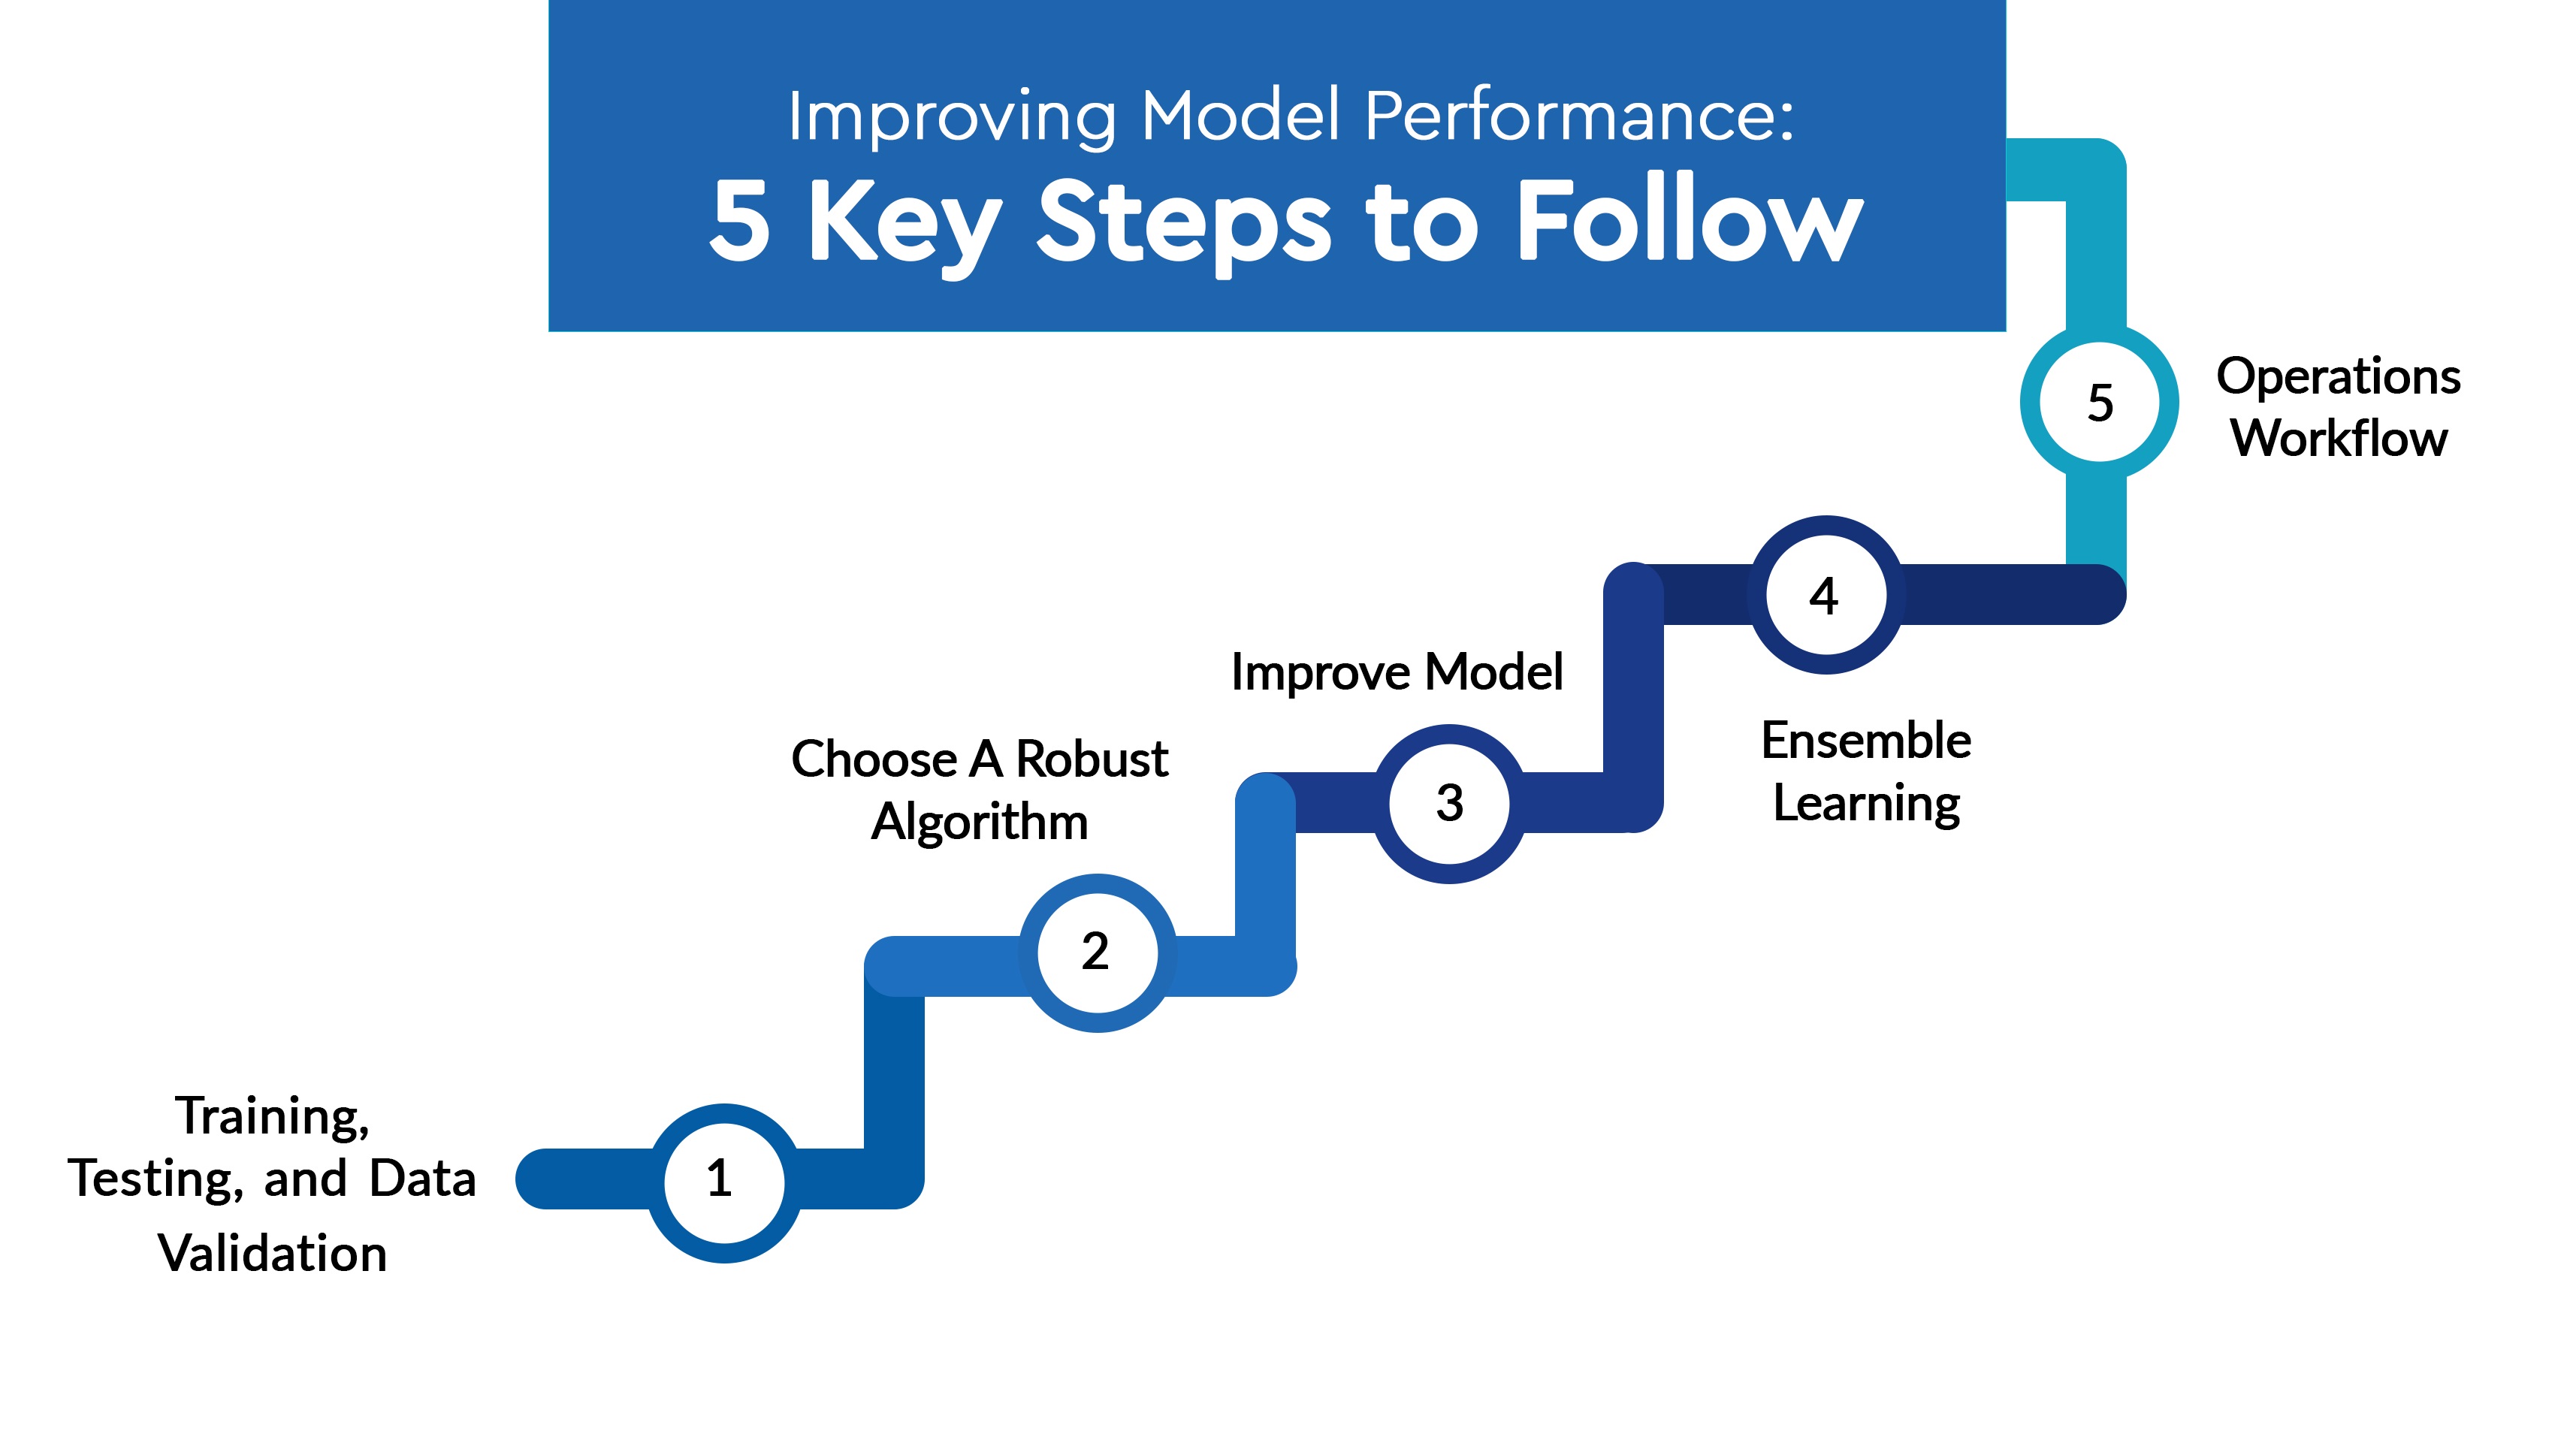 5 steps to follow - Model performance